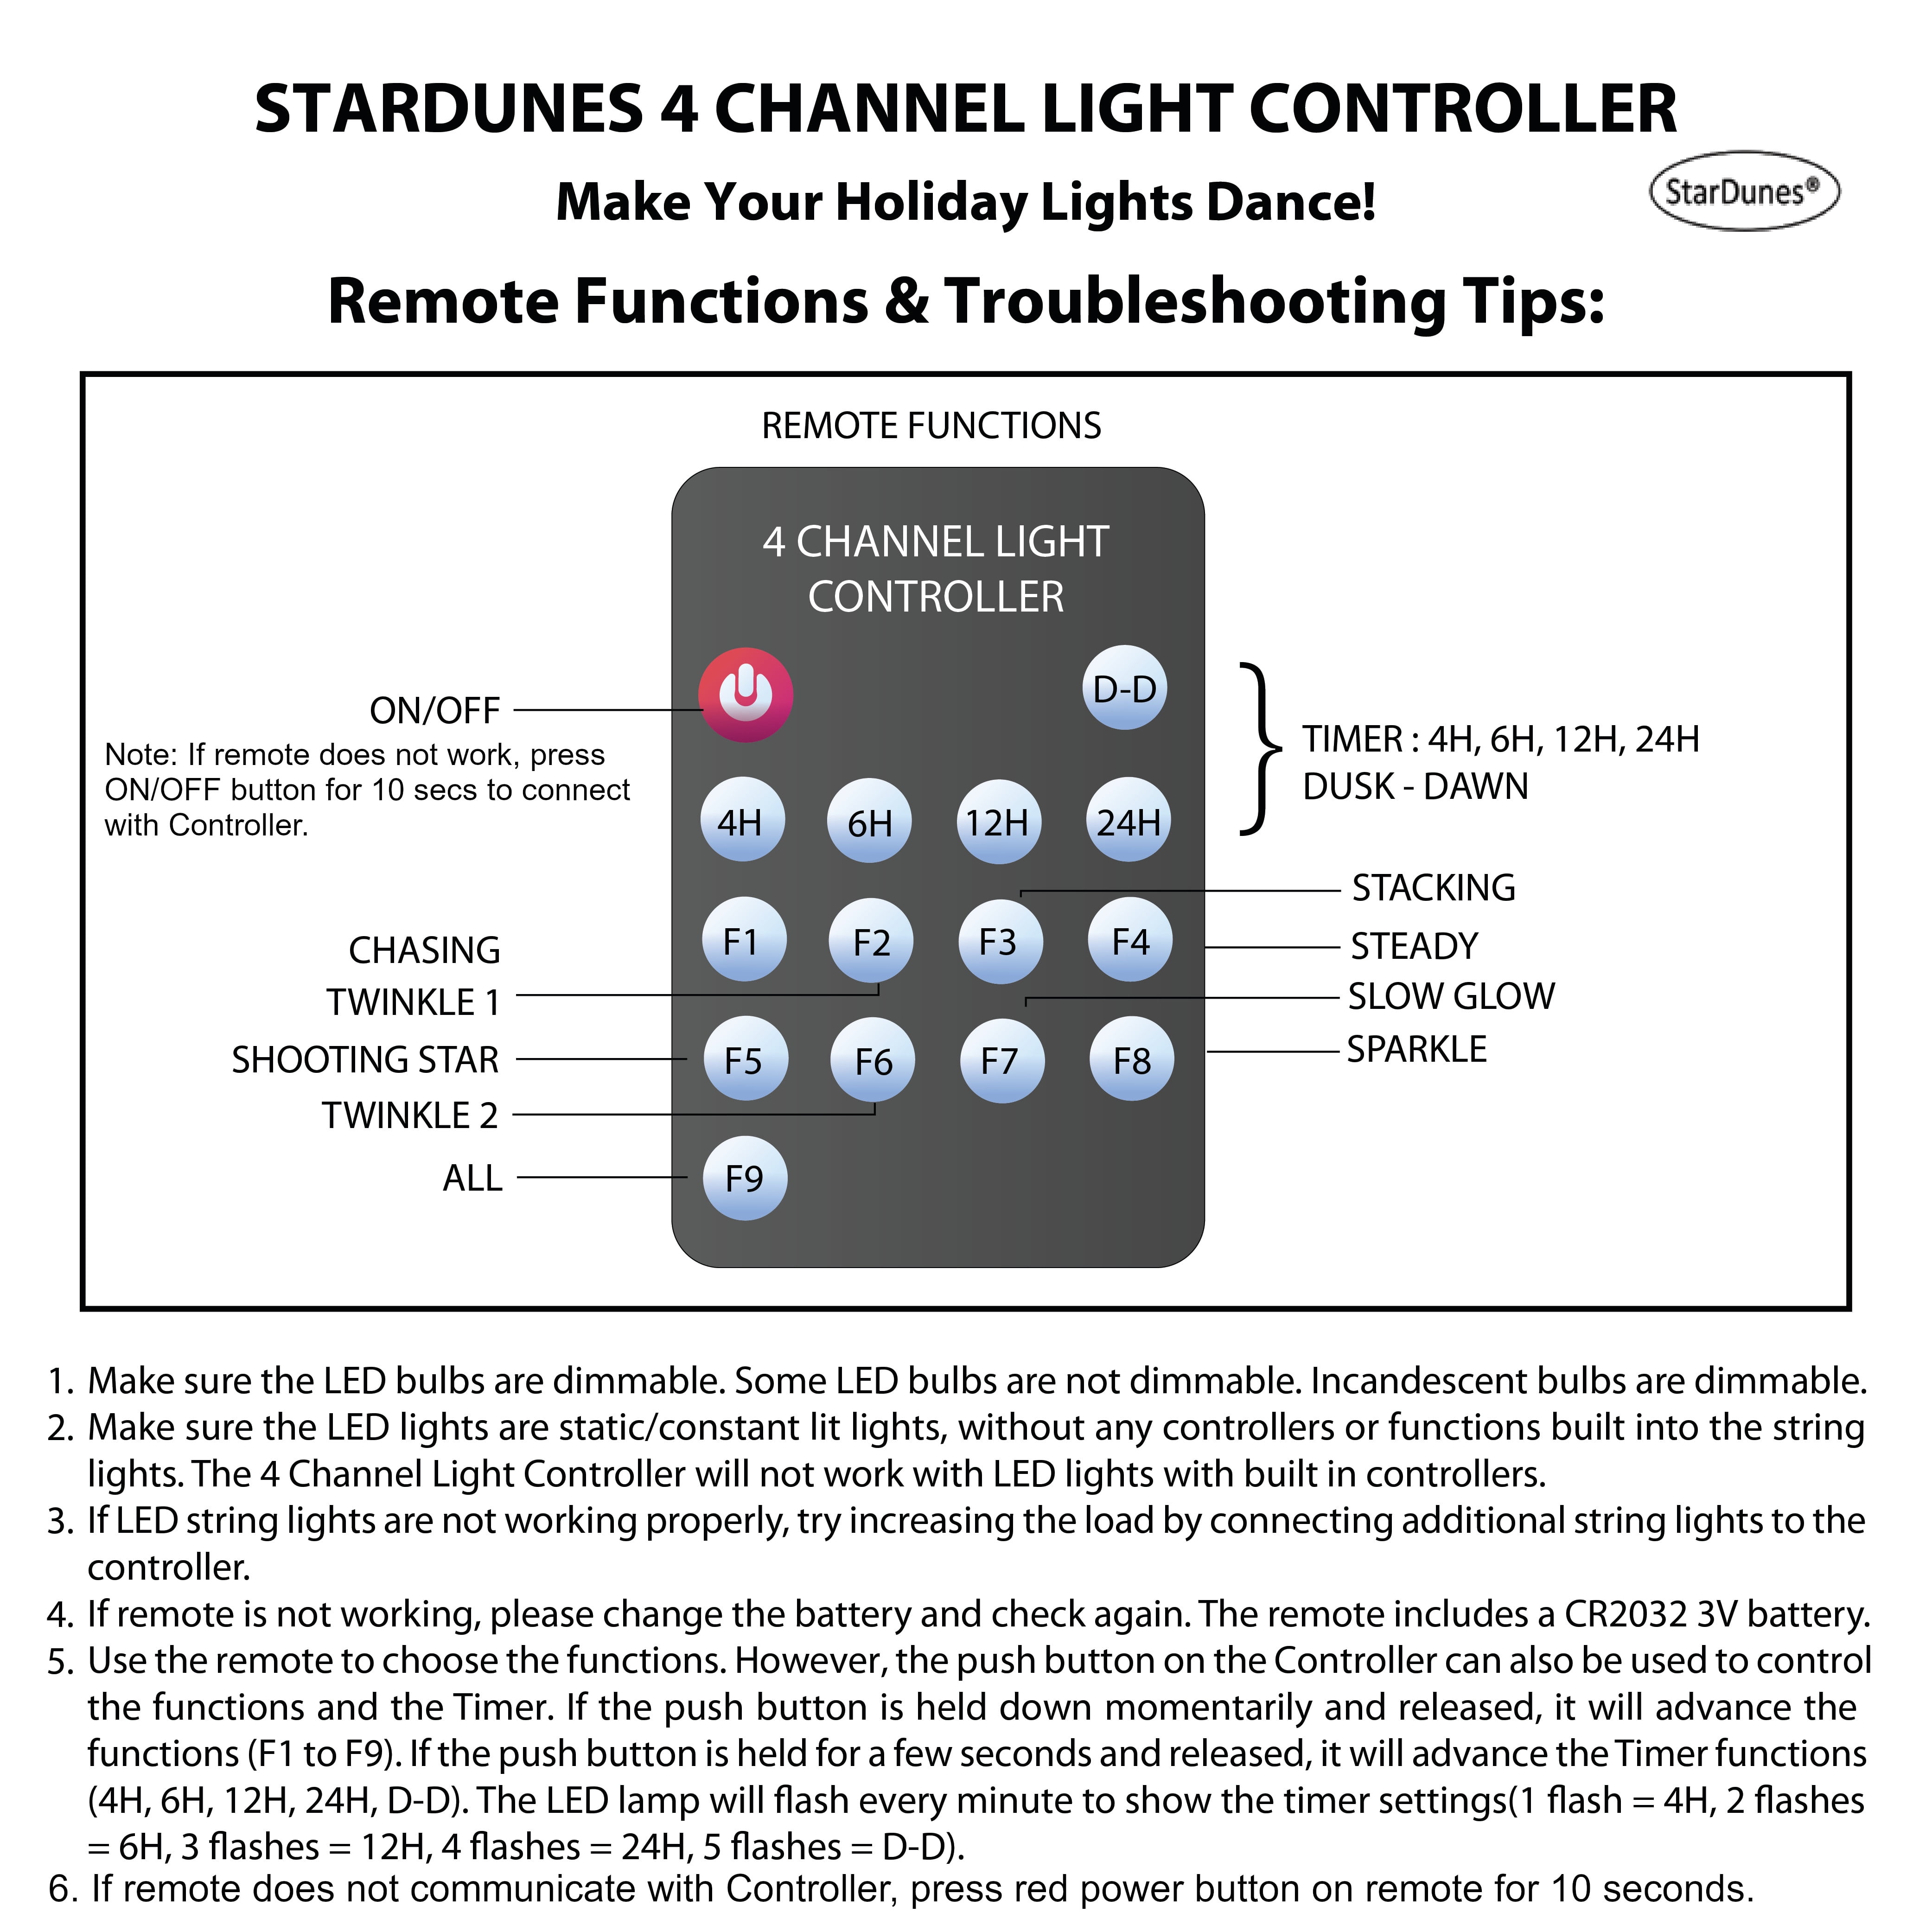 StarDunes Christmas Light Controller with 16 Functions for